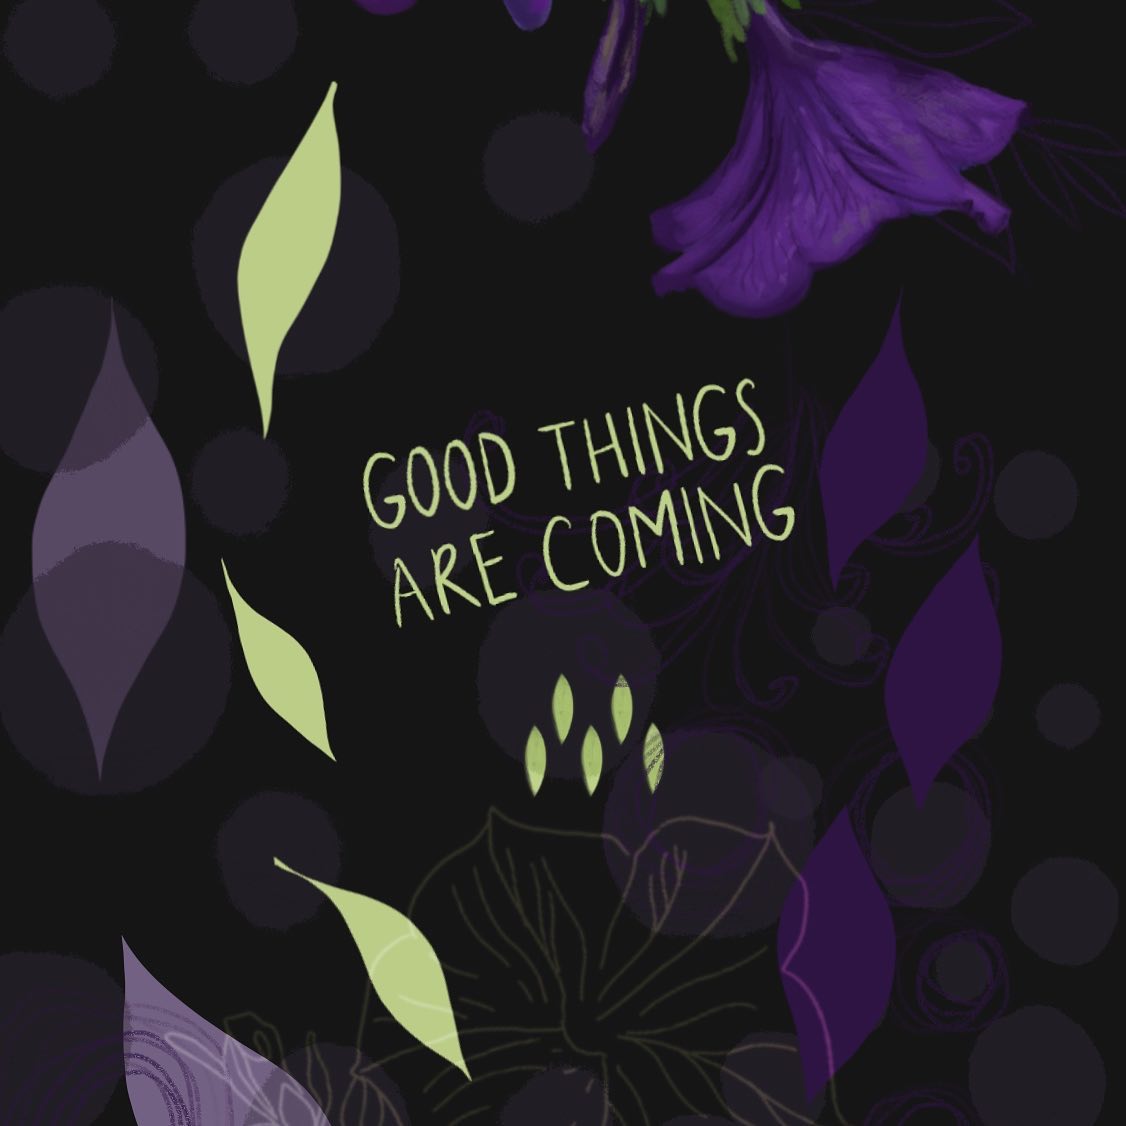 I often create wallpapers for my phone to act as constant reminders and affirmations. This one is inspired from these beautiful petunias that managed to survive!

Feel free to download:
https://www.cheenakaul.com/downloads

They bloom and thrive again and again. Each spring season, we bring many flowering plants from the nursery to adorn our home. This season somehow didn’t get the chance to. They sprouted back to life and bloomed again. All the pots sitting there and bracing the winter have all come to life! Plants save their energy in their roots, and once the weather is all good, they push forward and thrive. Like a hibernation of sorts!